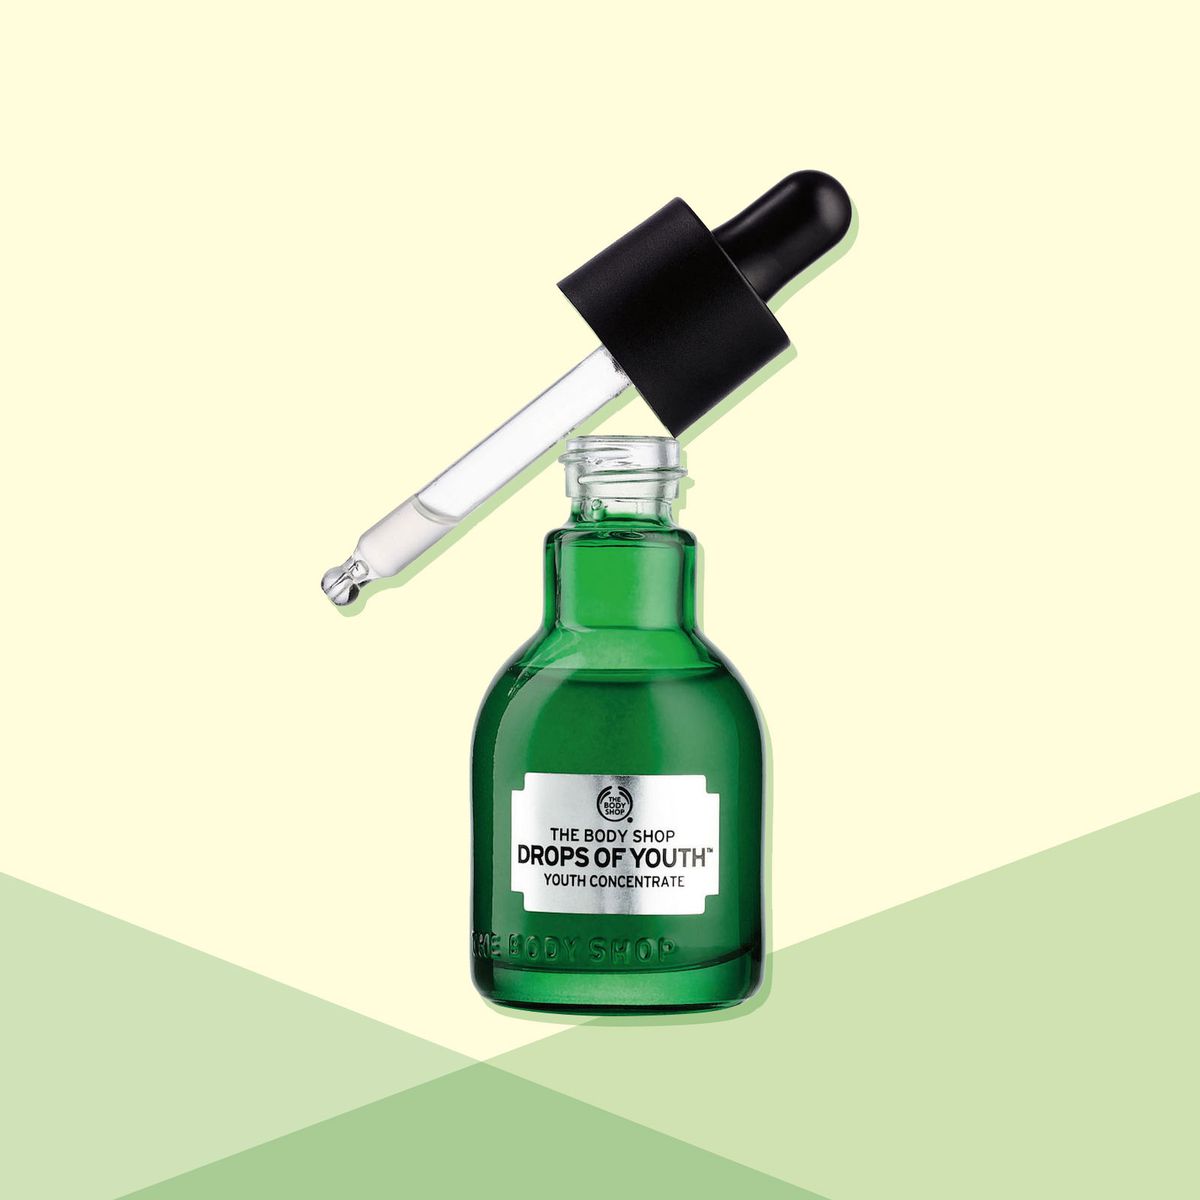 The Best Anti Aging Serum Is The Body Shop S Drops Of Youth Youth Concentrate Instyle